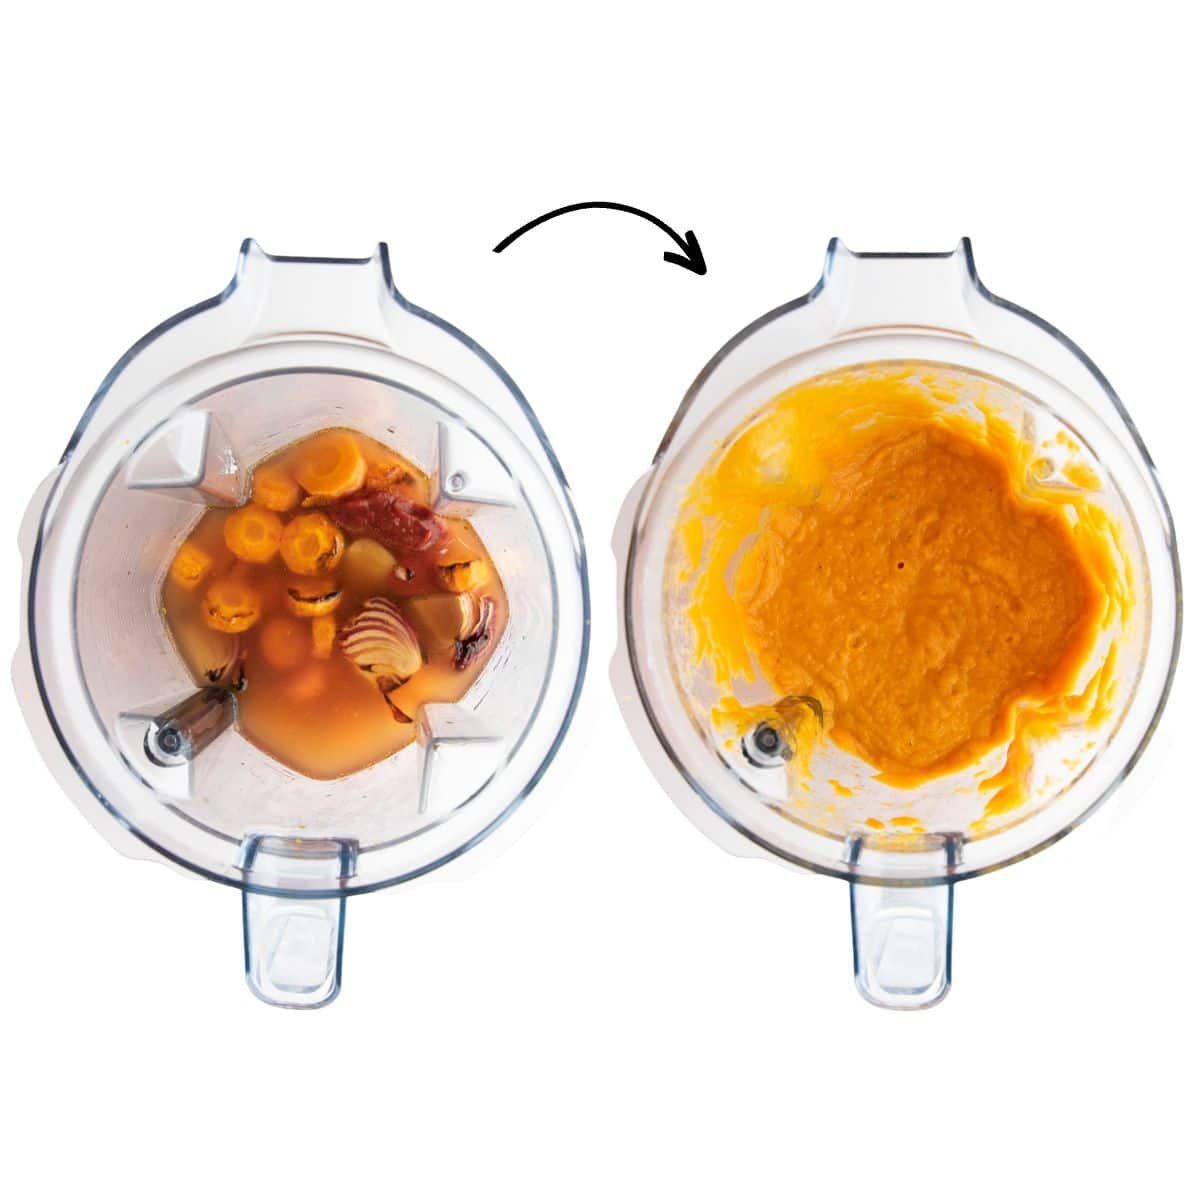 Carrot Sauce Ingredients in Blender Before and After Blending.